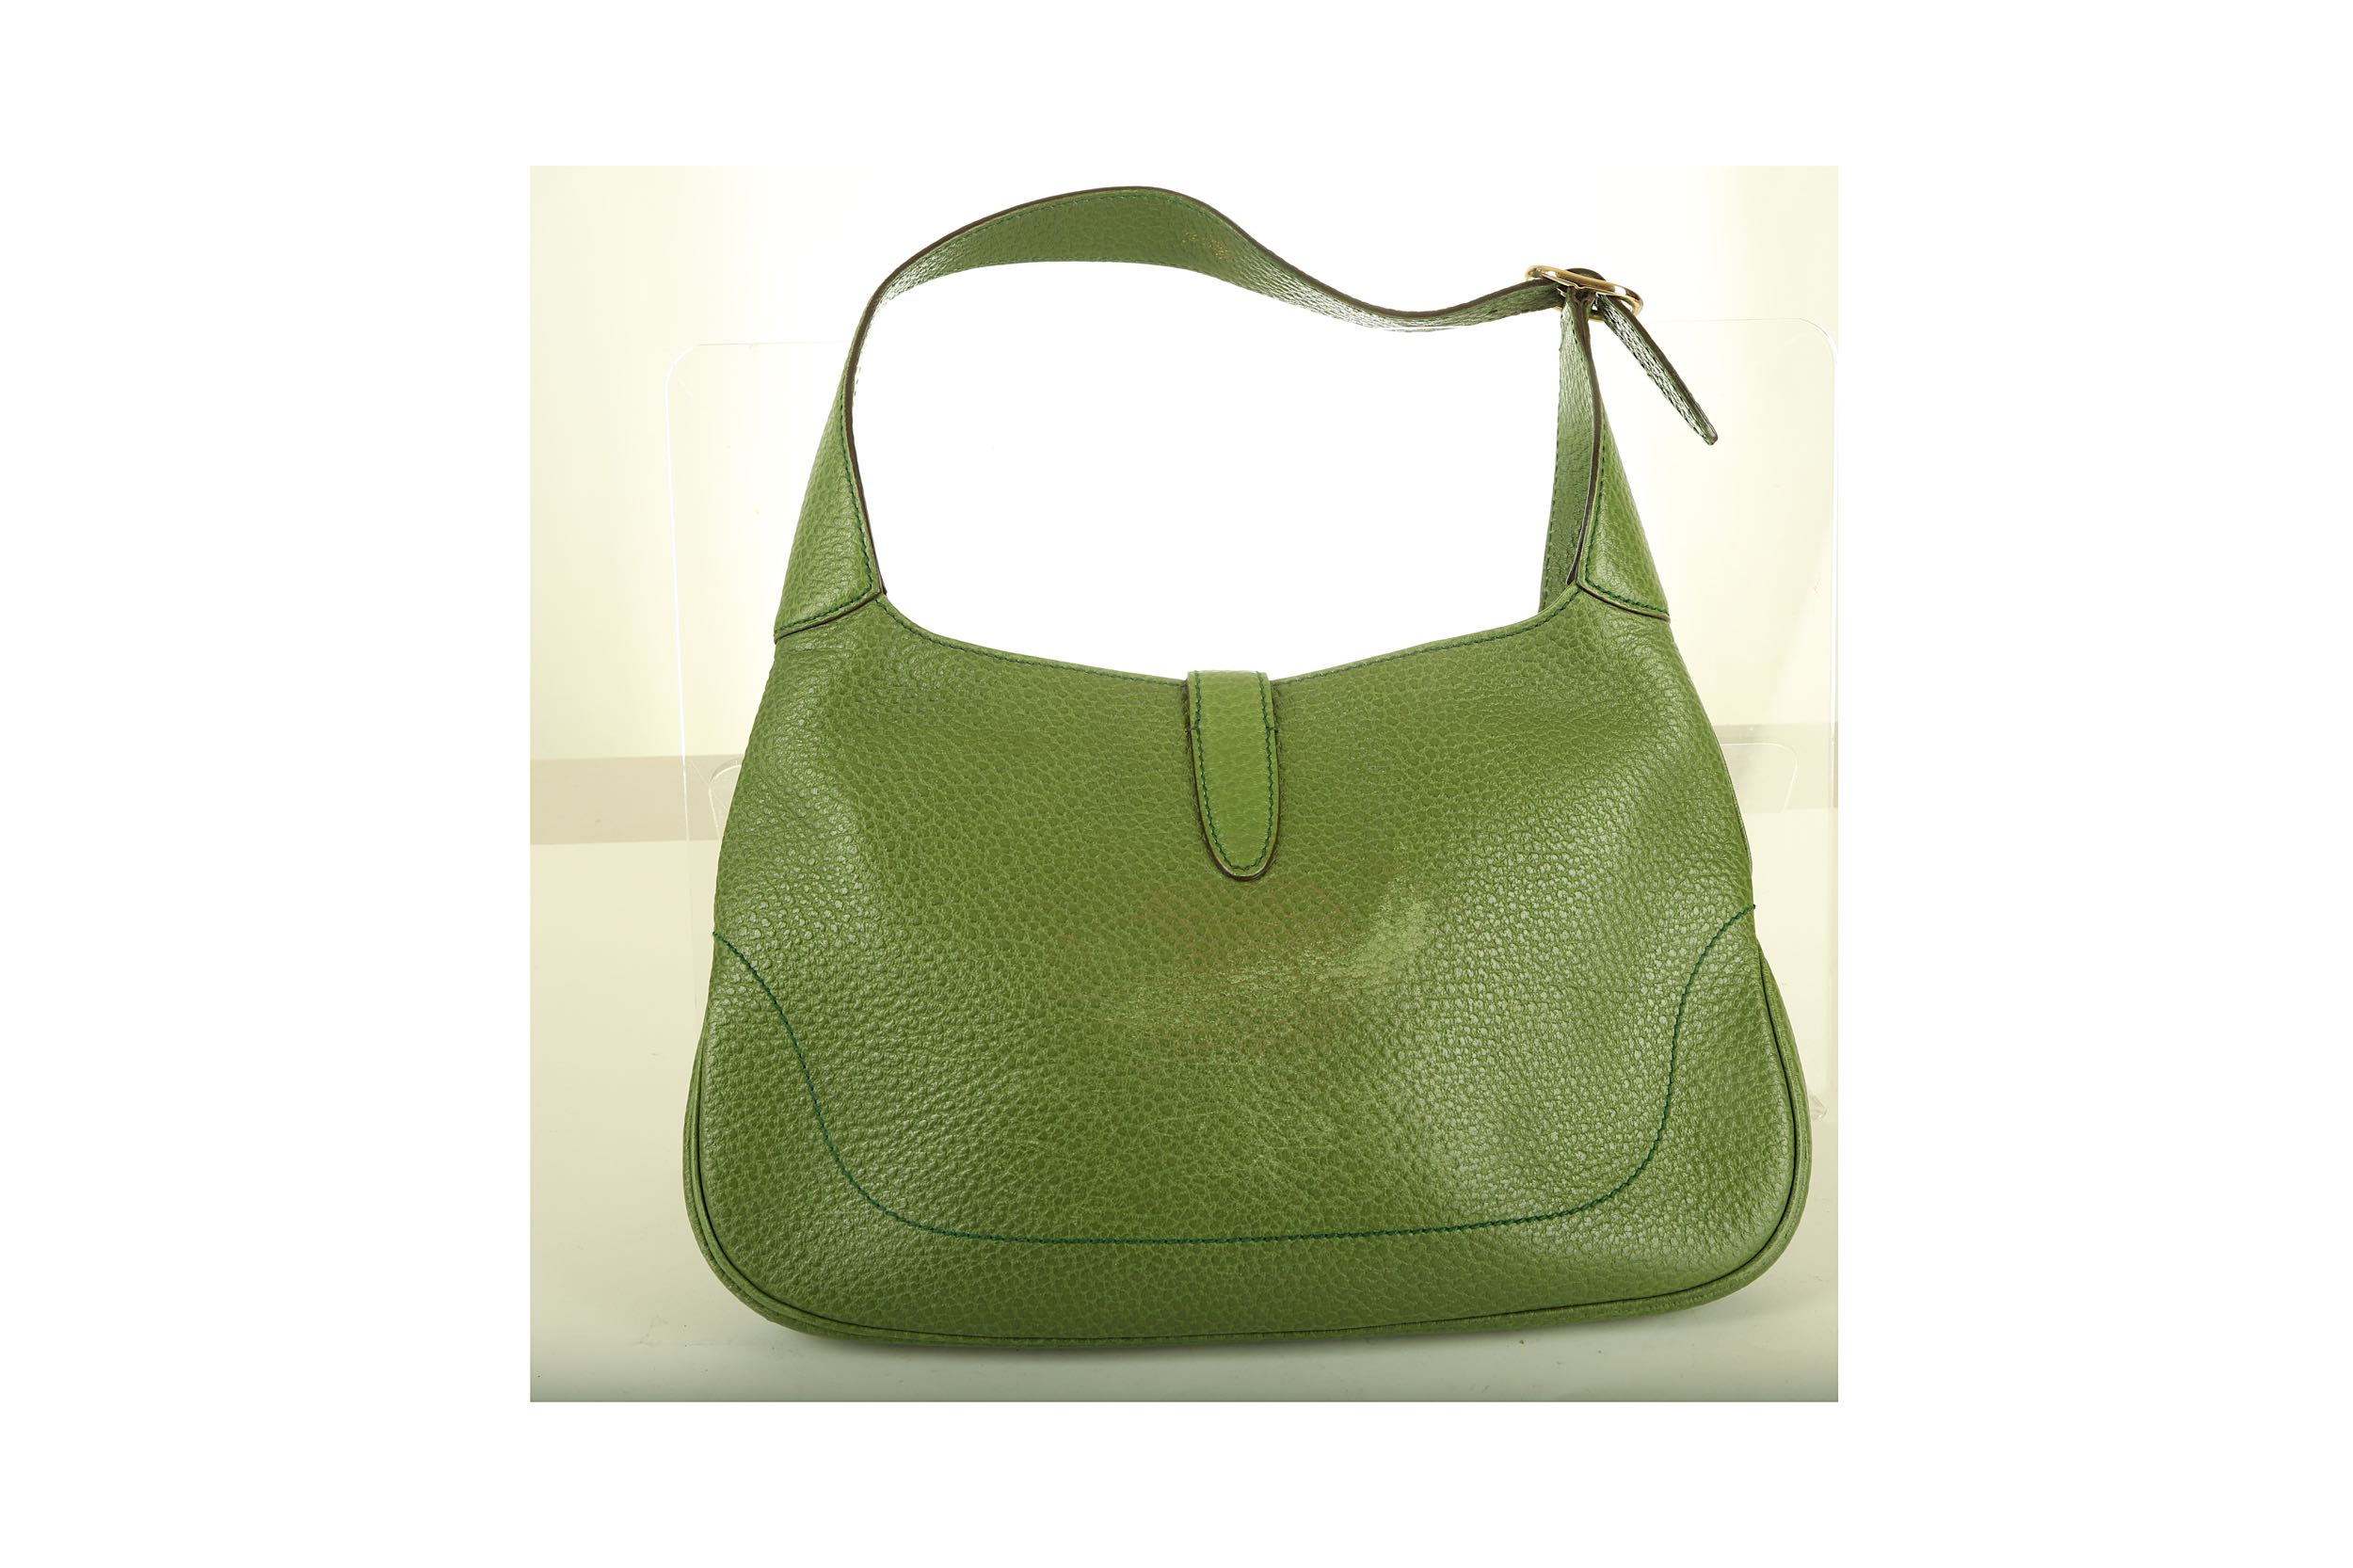 Gucci Green Jackie O Shoulder Bag, grained leather - Image 2 of 4